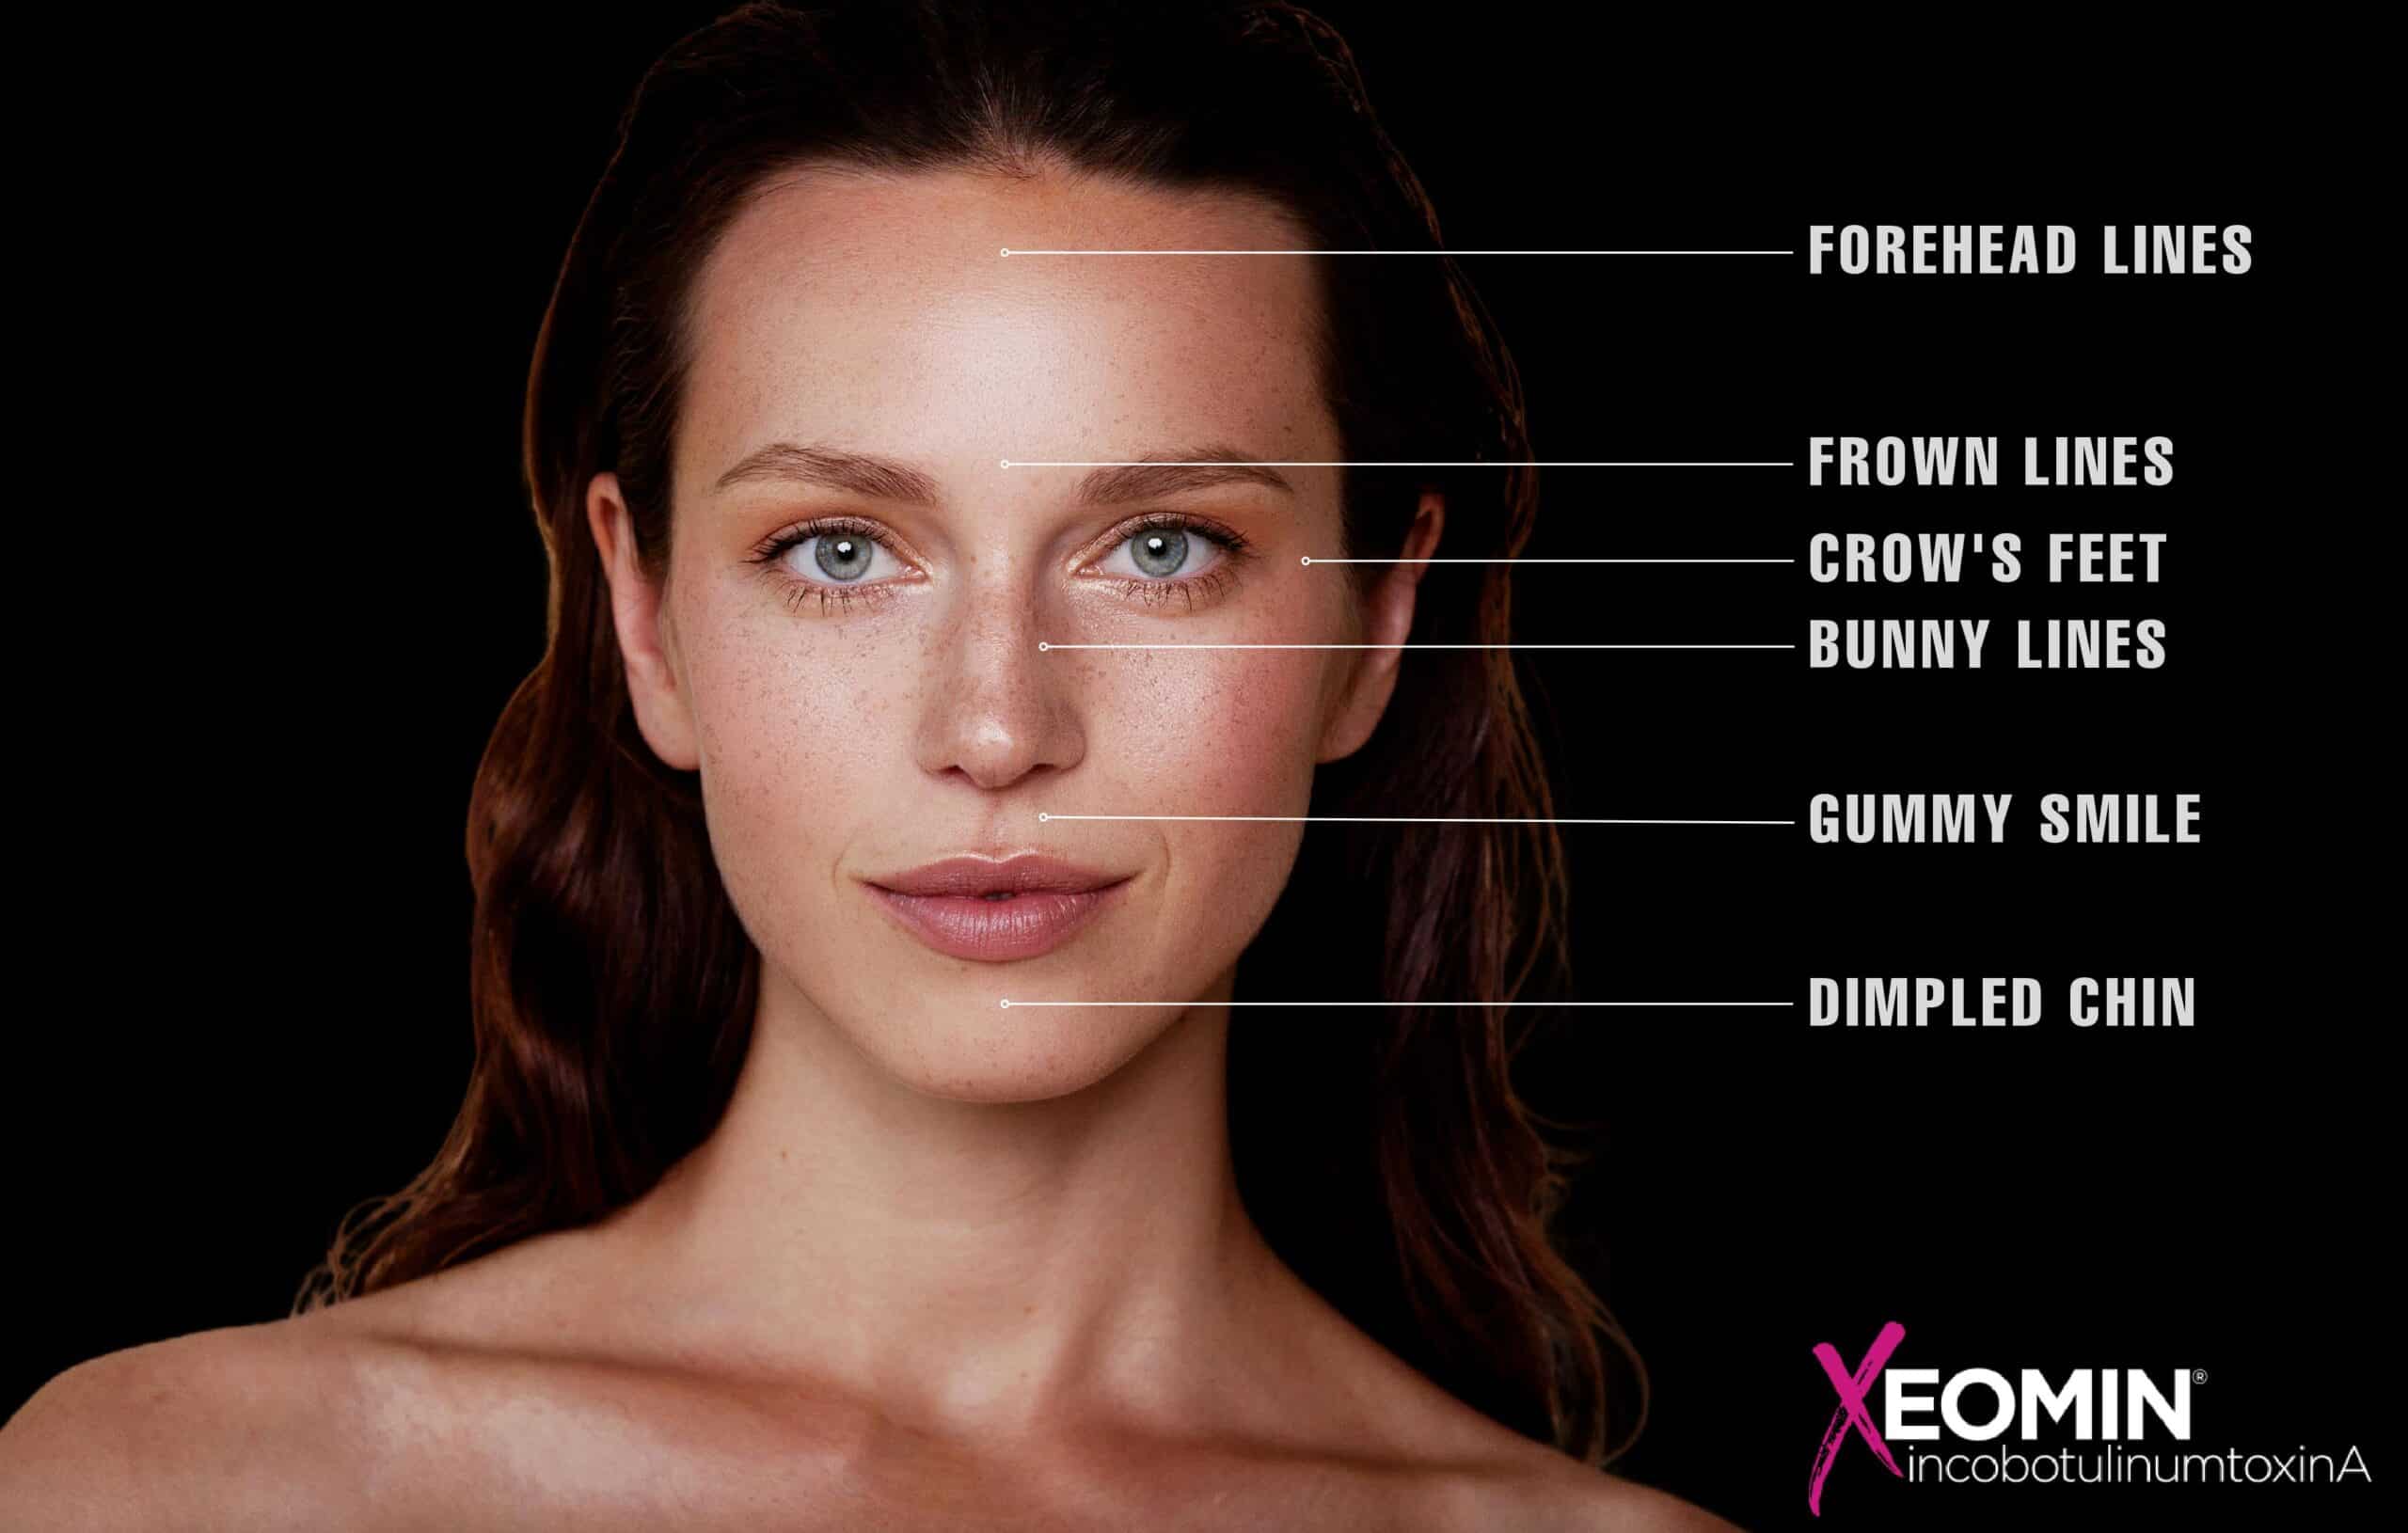 Beautiful woman with radiant, smooth skin models Xeomin treatment areas in Las Vegas and Reno.